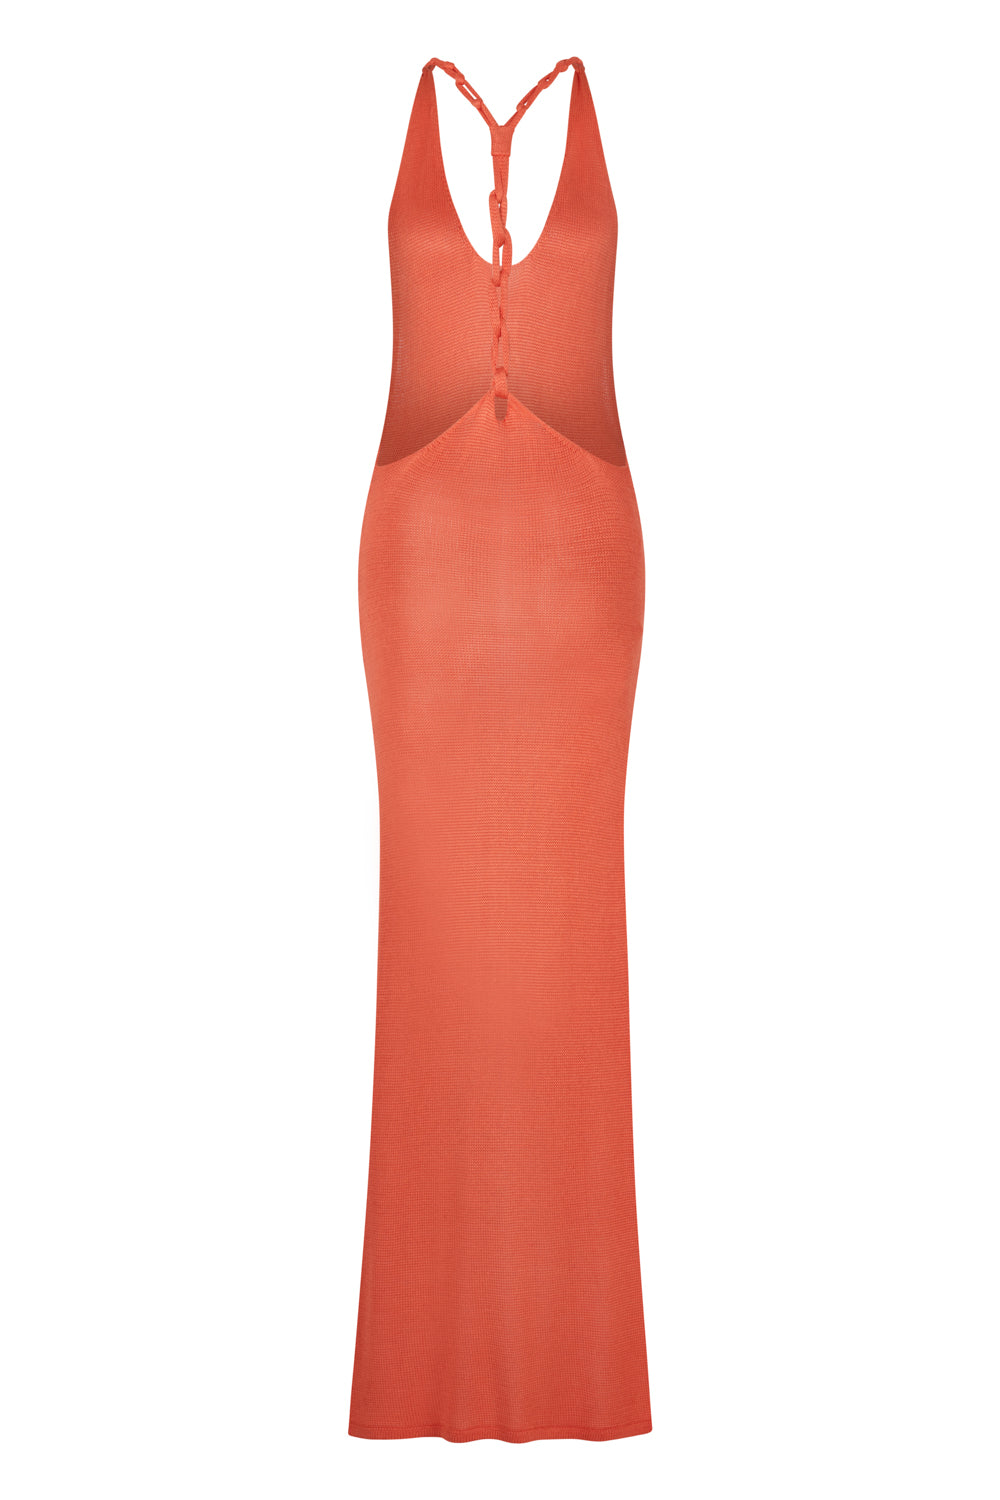 flook the label larisa maxi dress coral knit product image back